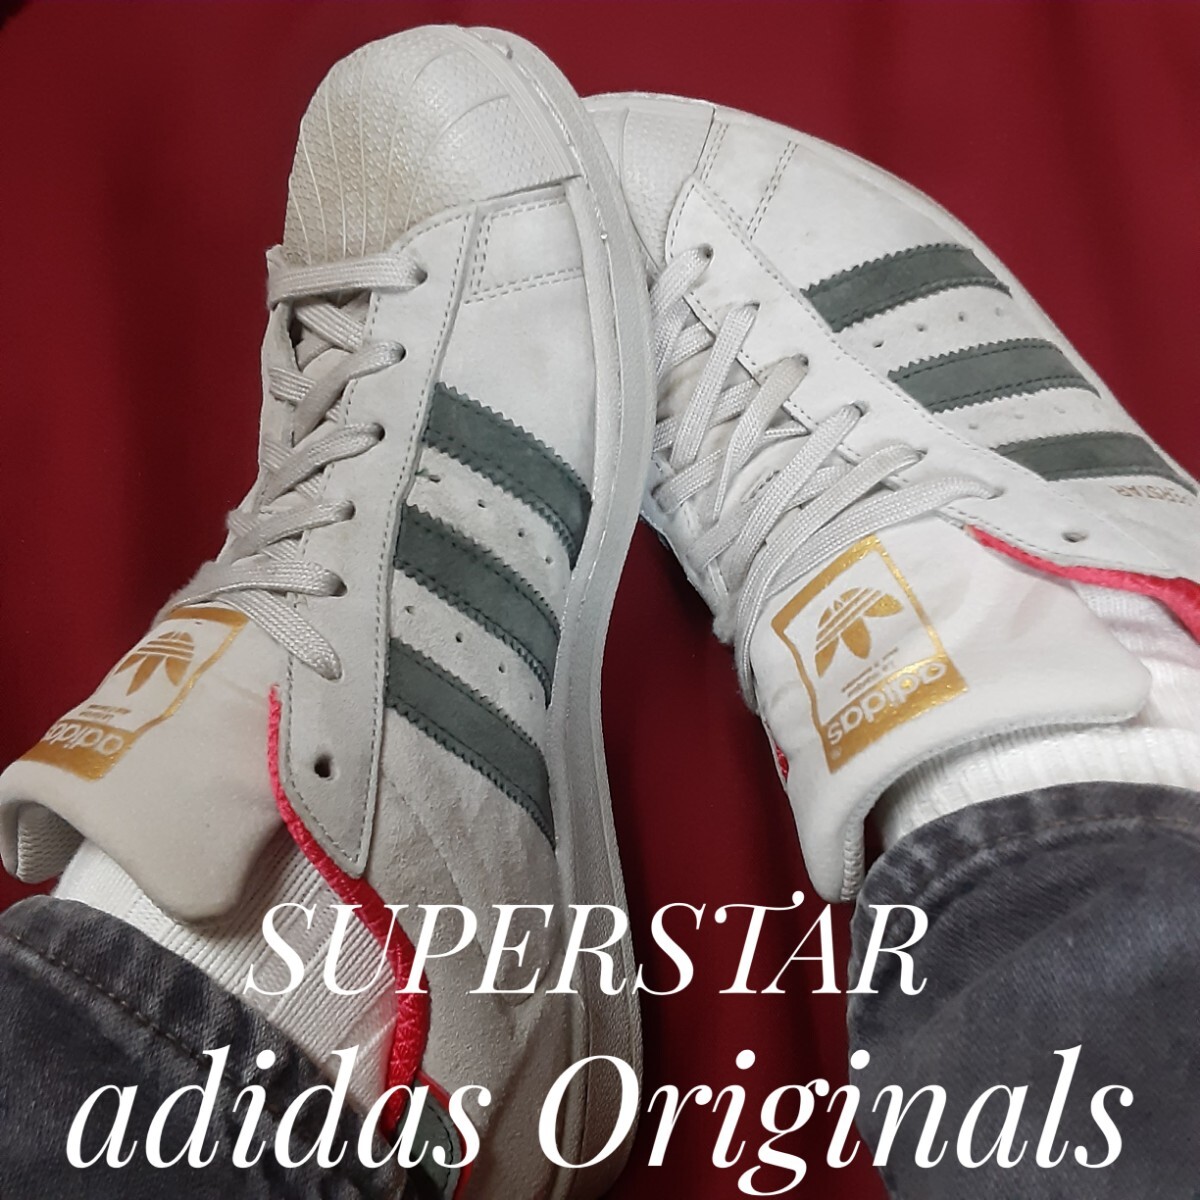  most price!17 year made! reissue gold Velo! toe cap! Adidas super Star high class n back leather sneakers! rare cement color! grey red 26.5cm